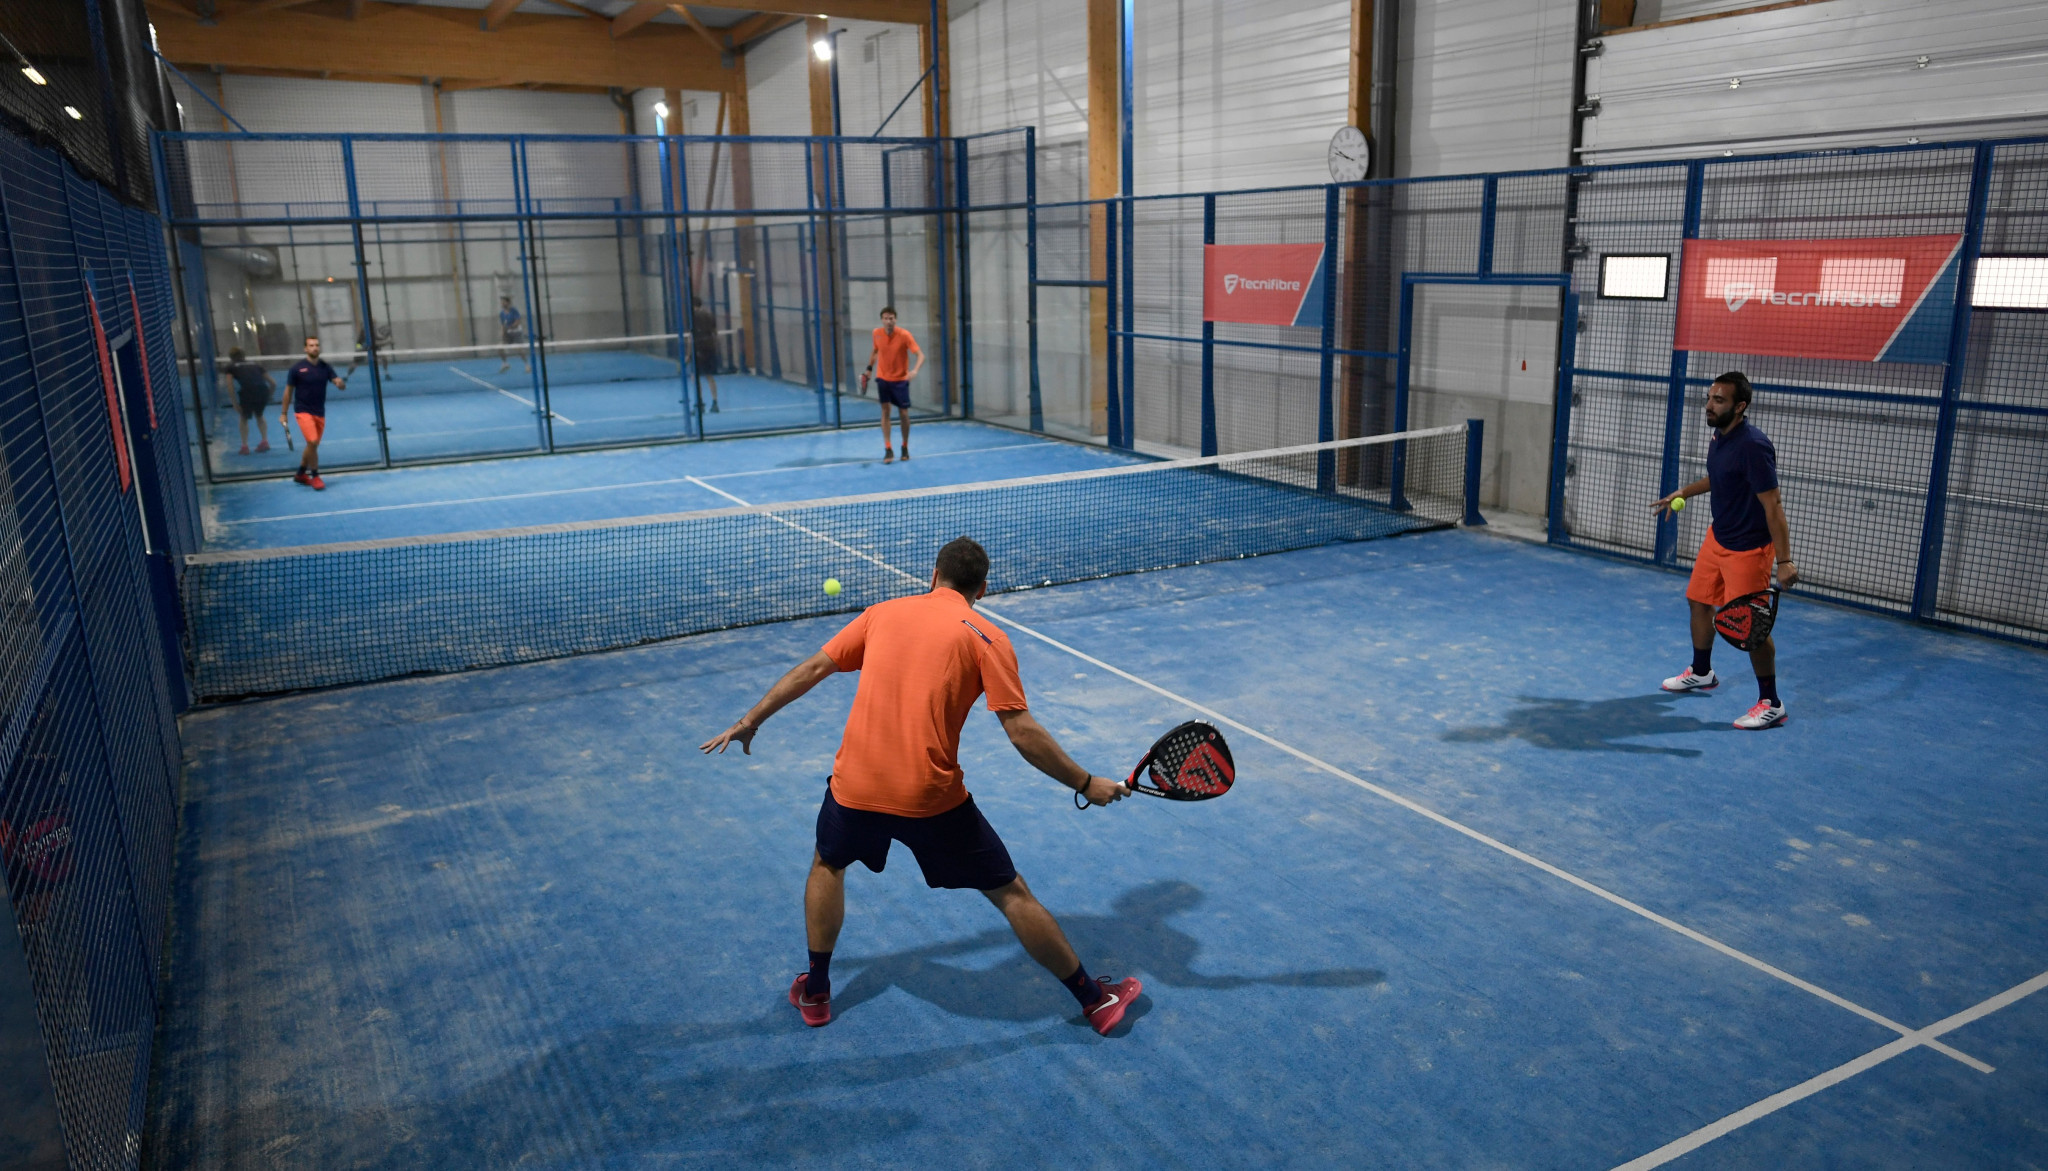 International Tennis Federation accused of "hostile takeover" of padel in appeal to CAS